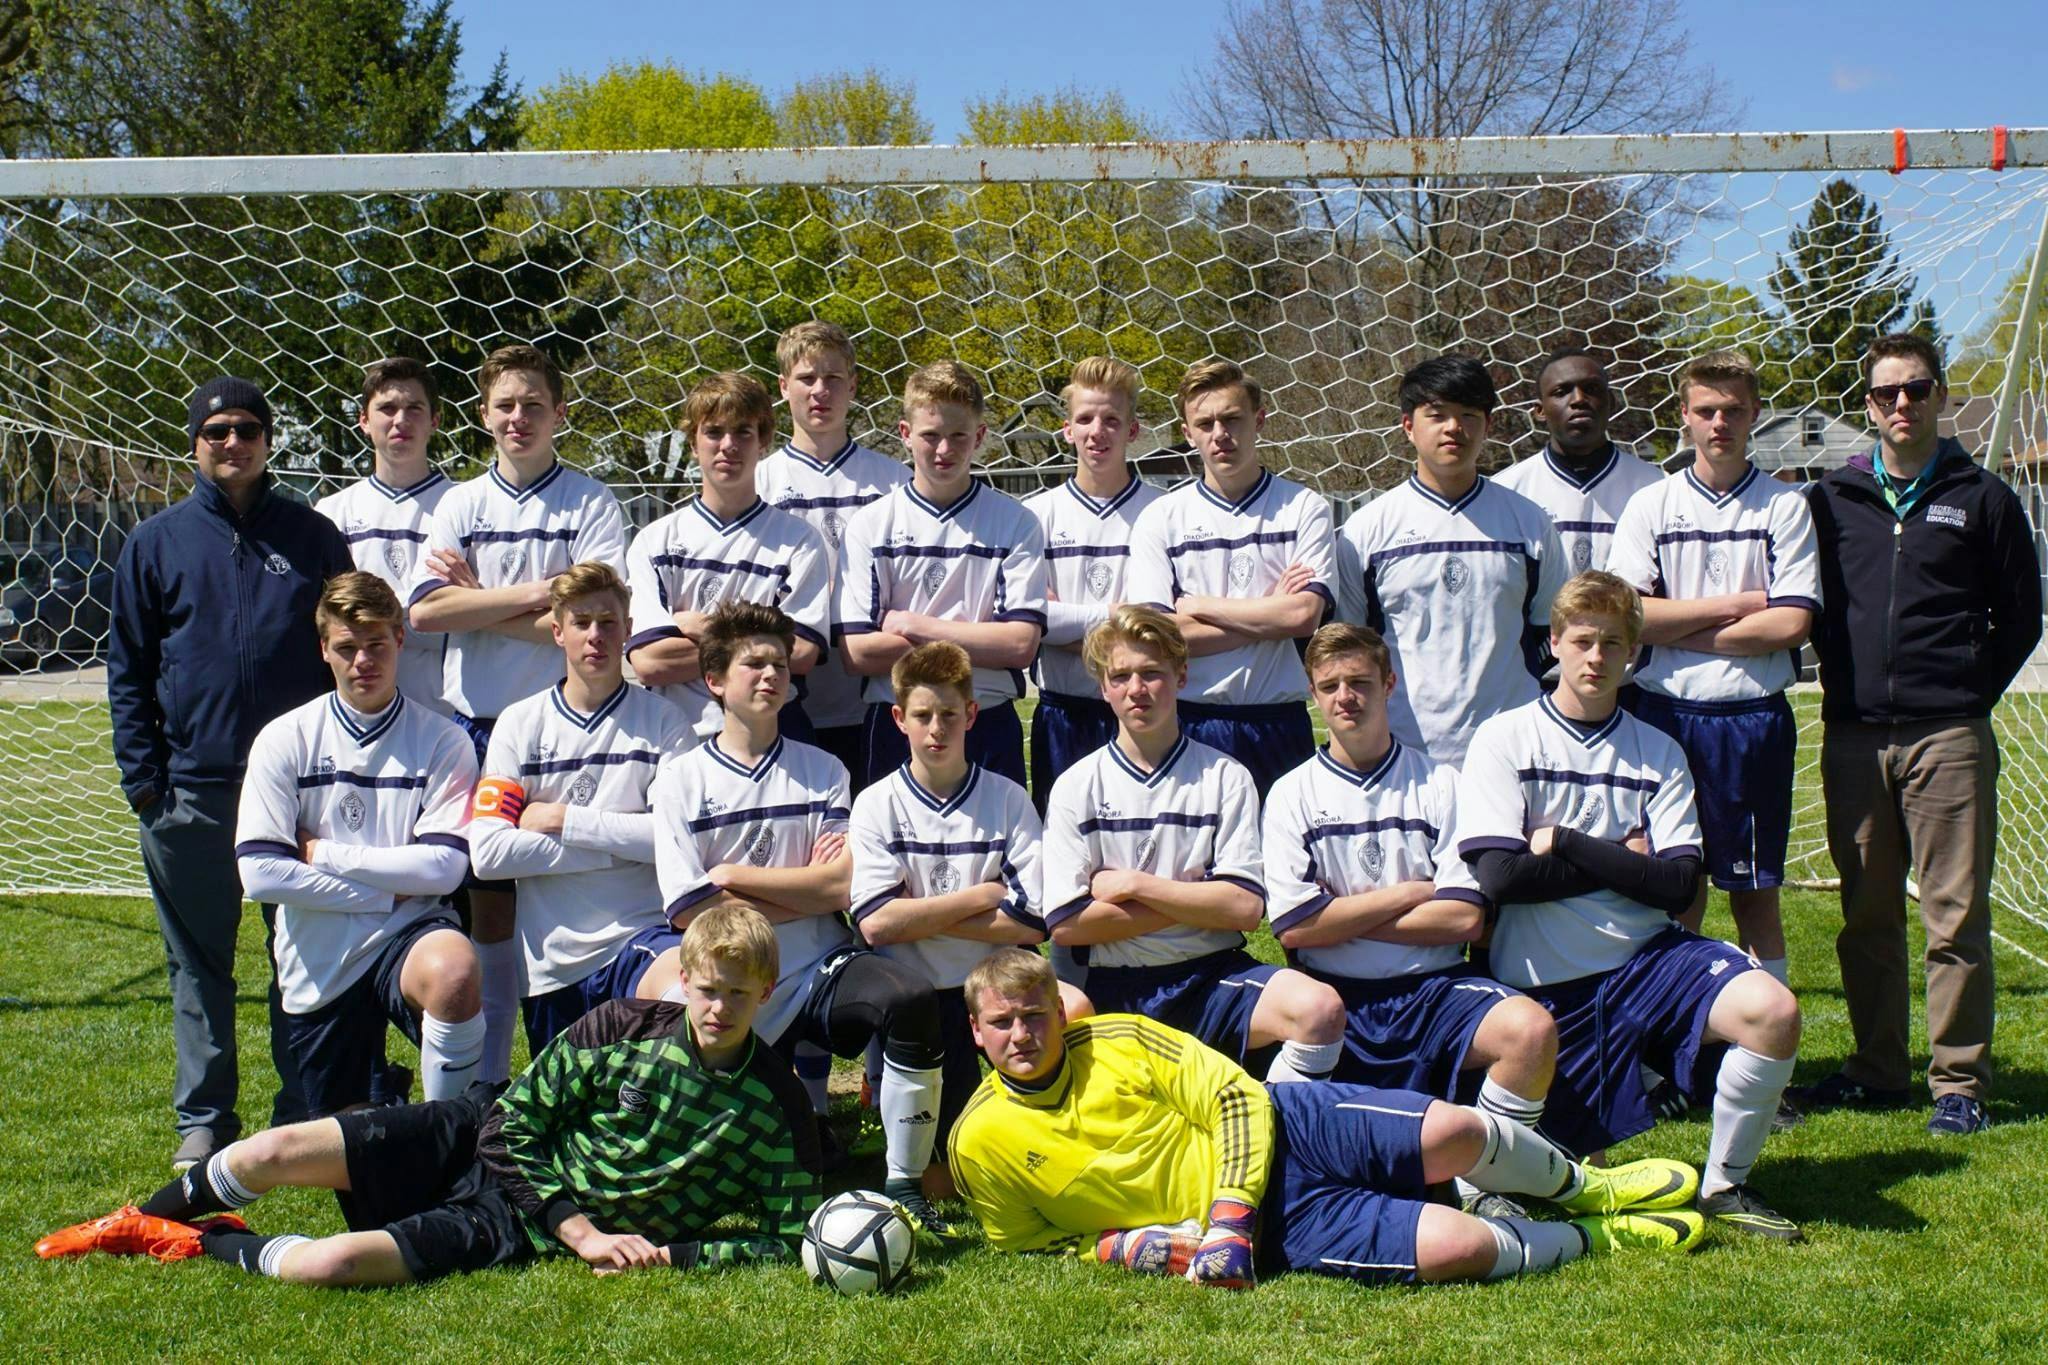 London Christian High boys soccer team posing for a team picture in front of a soccer goal.